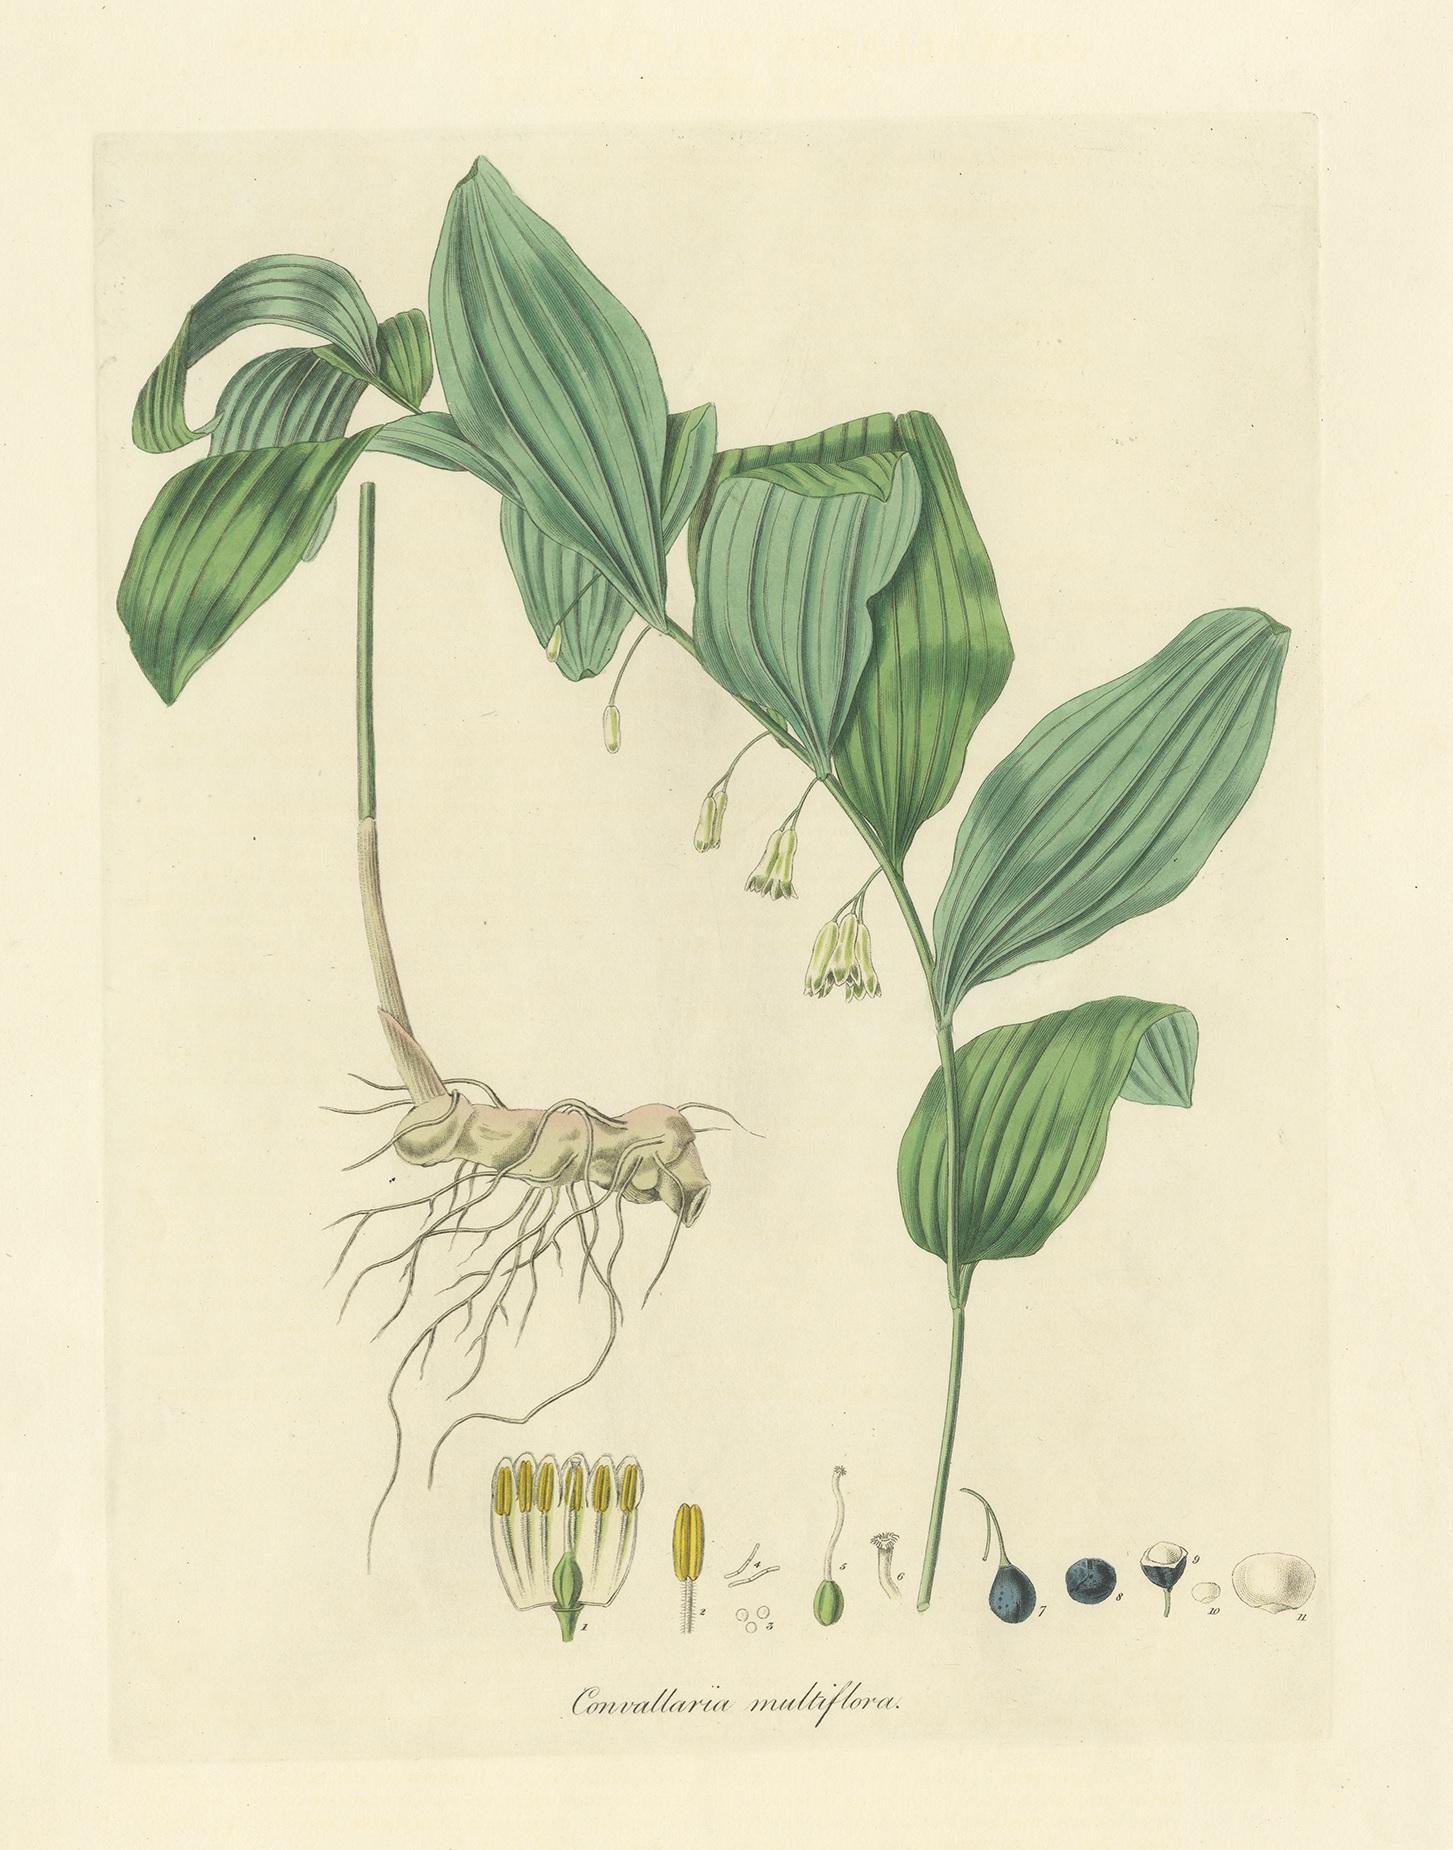 Antique botany print titled 'Convallaria Multiflora'. Hand colored engraving of the common Solomon's-Seal. This print originates from 'Flora Londinensis' by William Curtis.